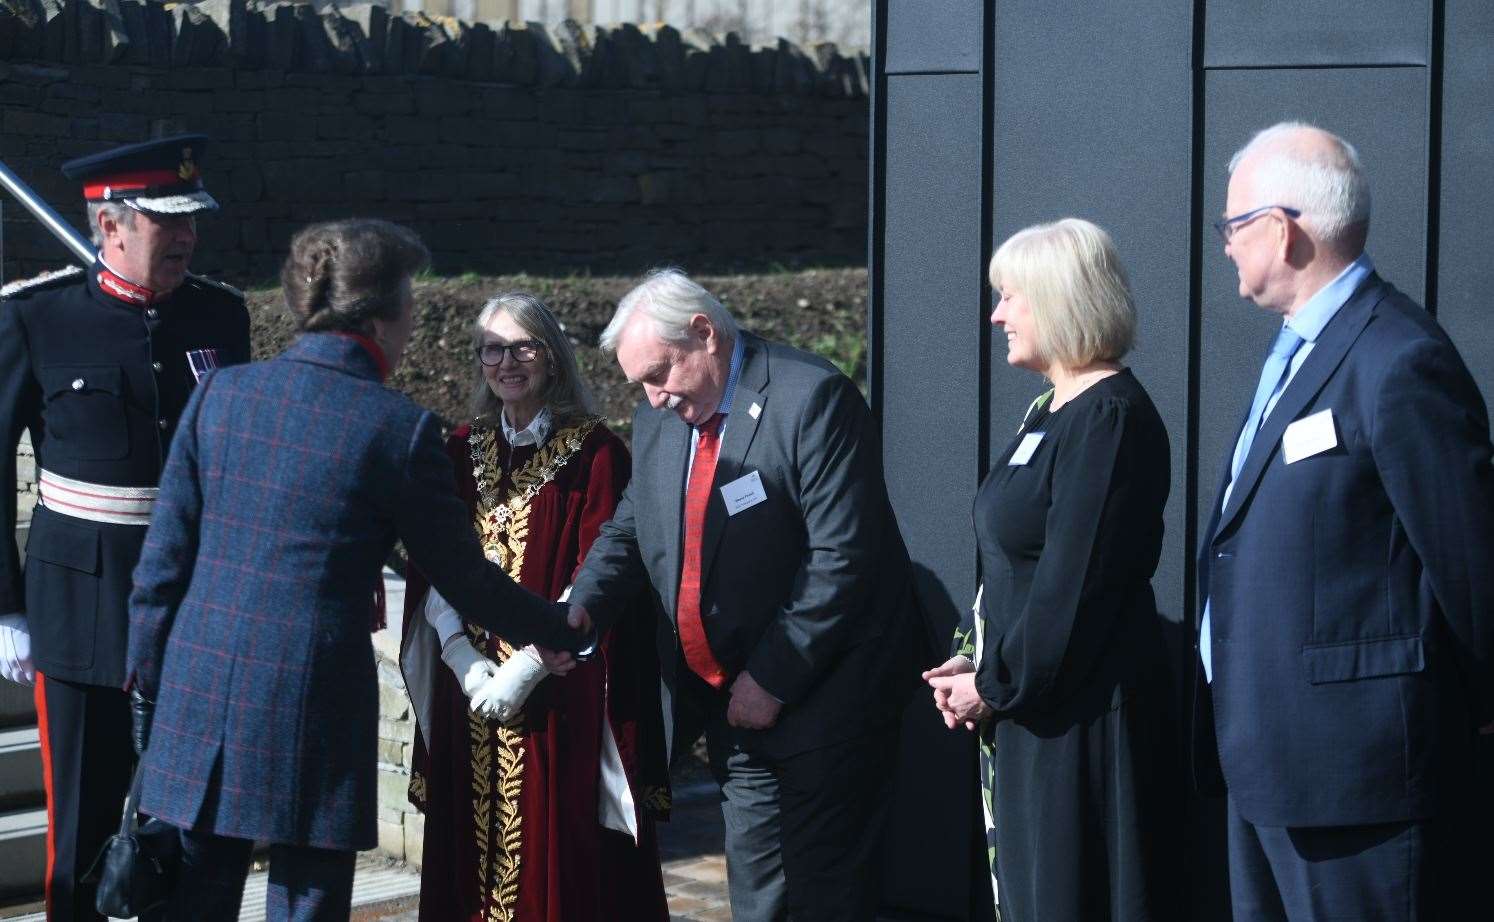 Princess Anne is welcomed to the Rural and Veterinary Innovation Centre.